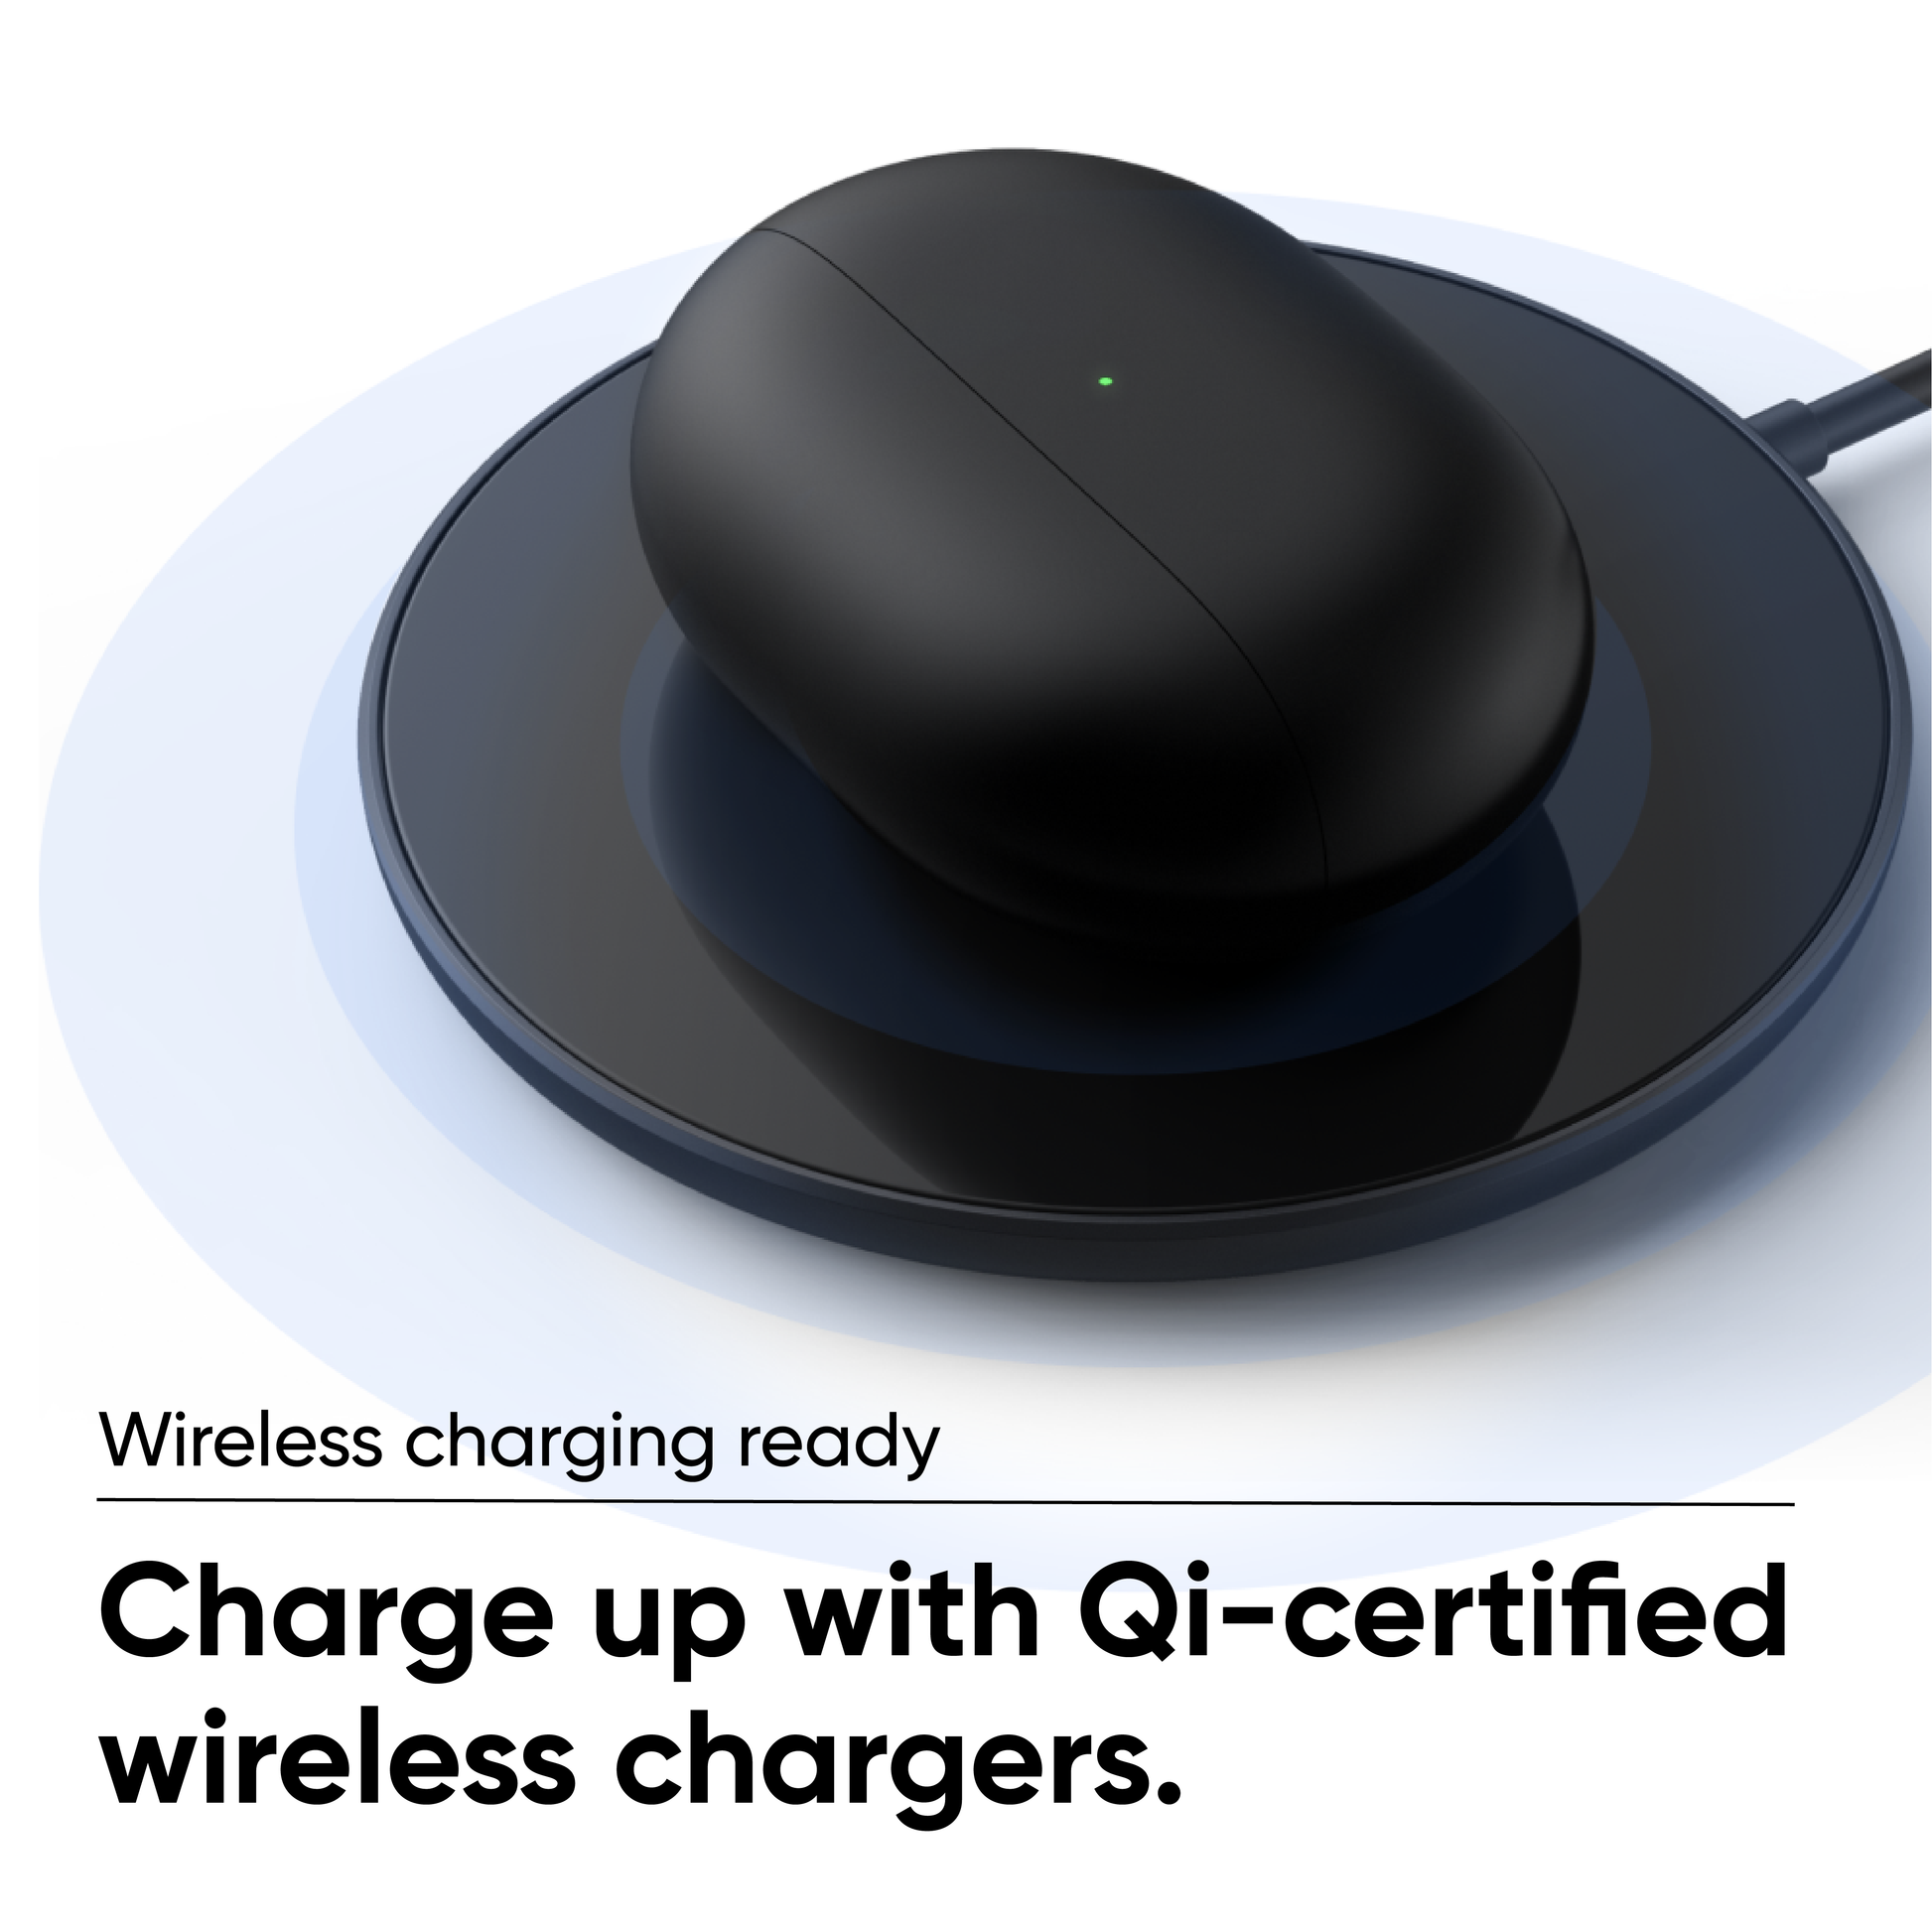 Wyze buds pro on wireless charging pad. Text overlay says, "Charge up with Qi certified wireless chargers."